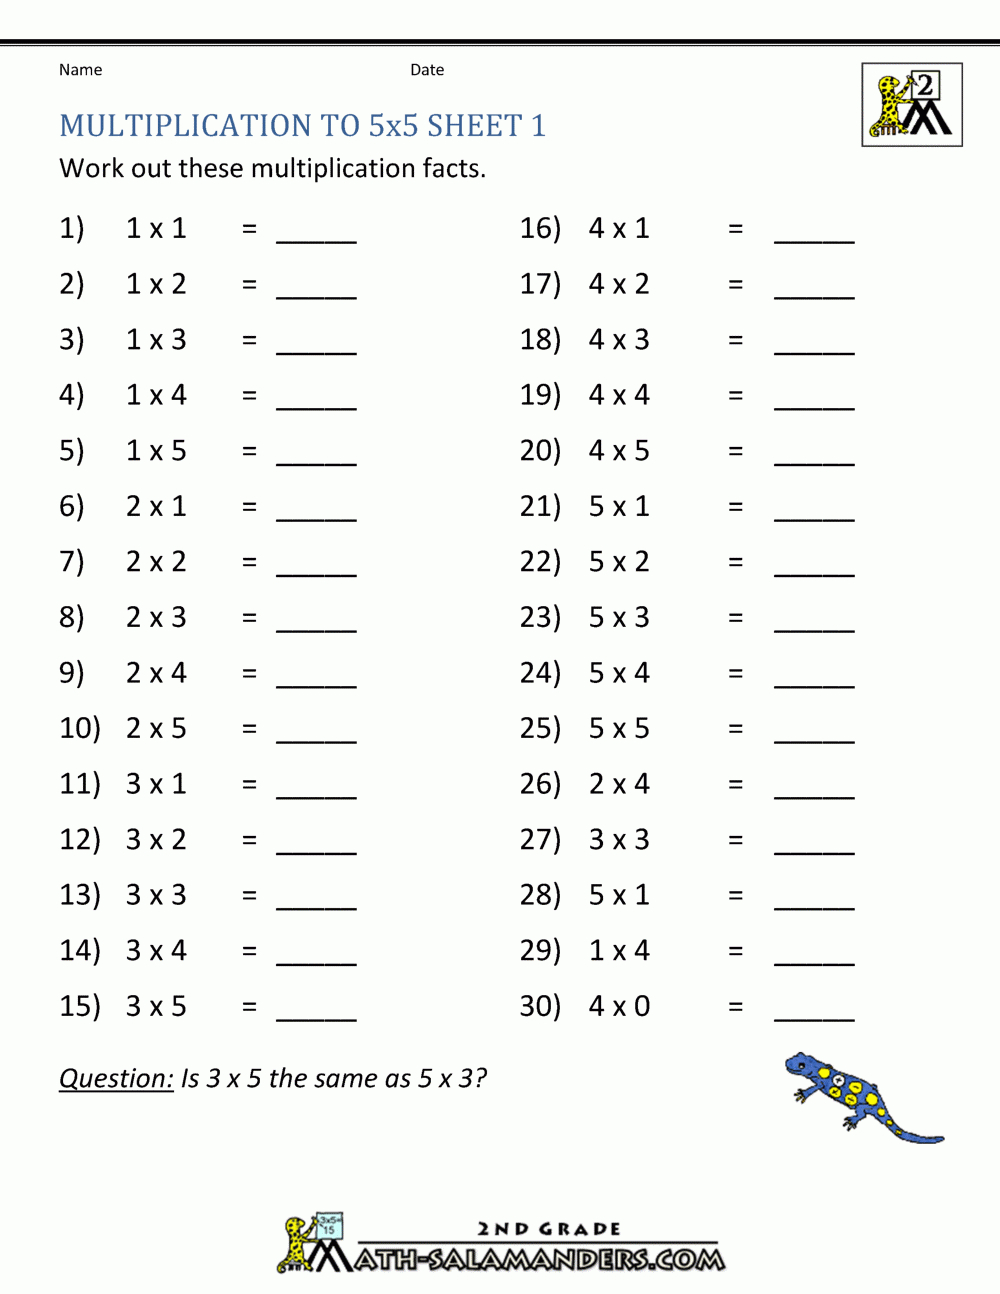 Mixed Multiplication Table Times Tables Worksheets Free Printable 